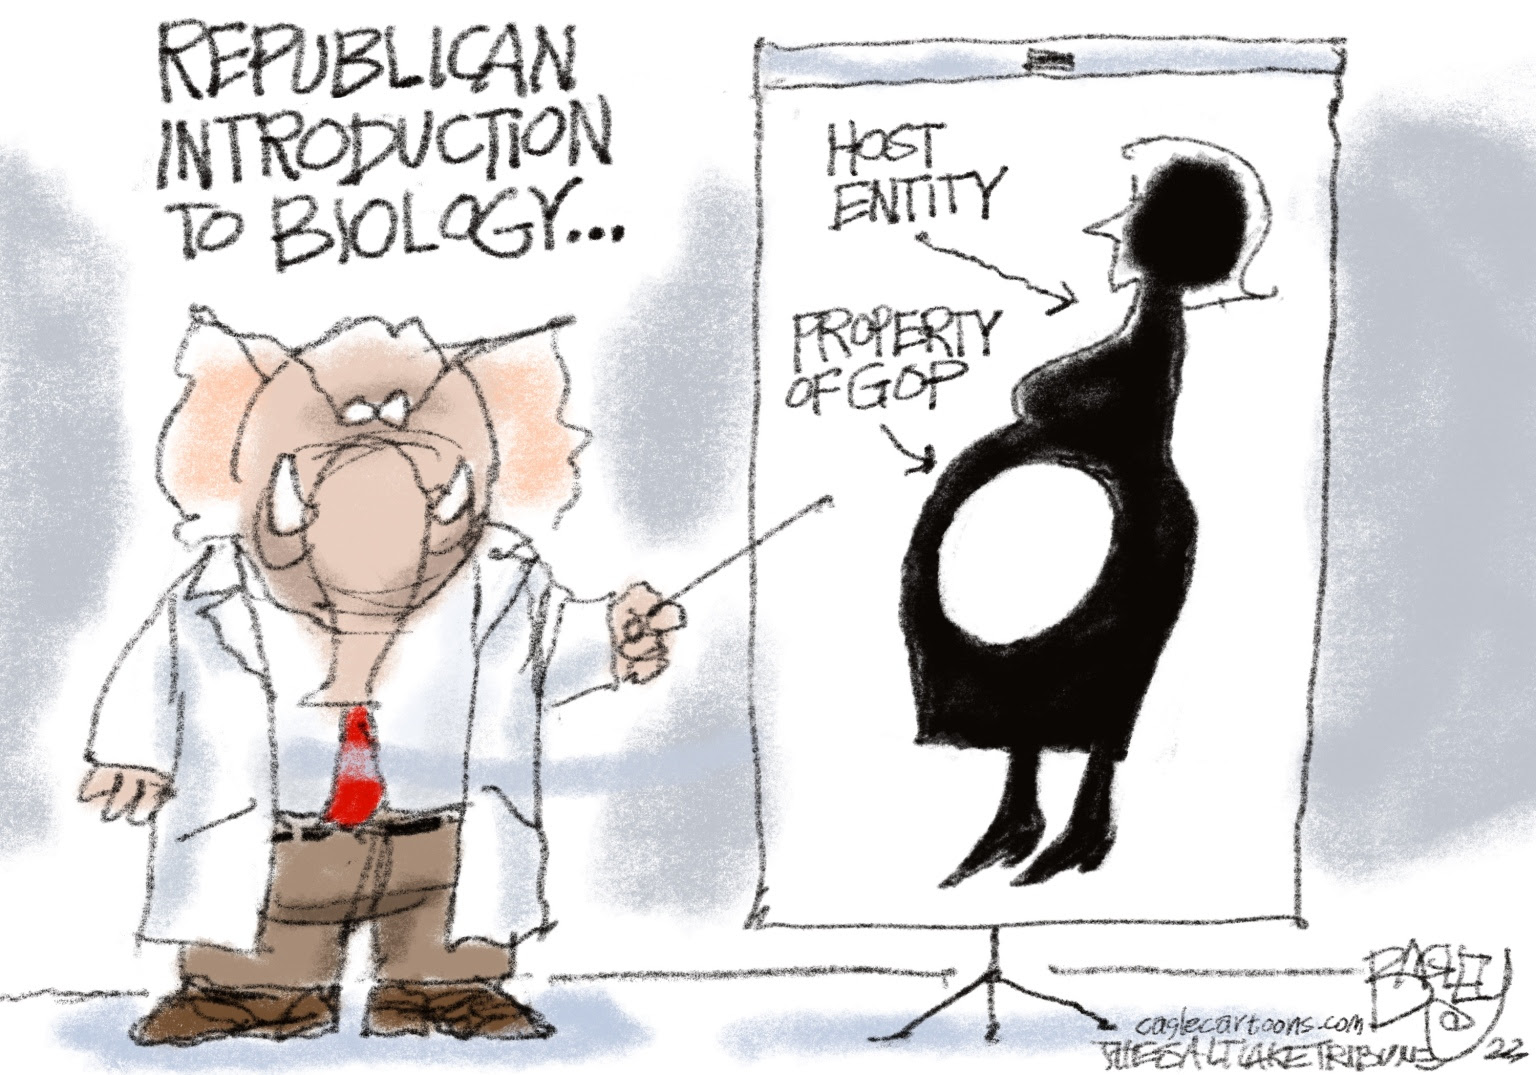 Republicans ban abortions and deny women control over their own bodies